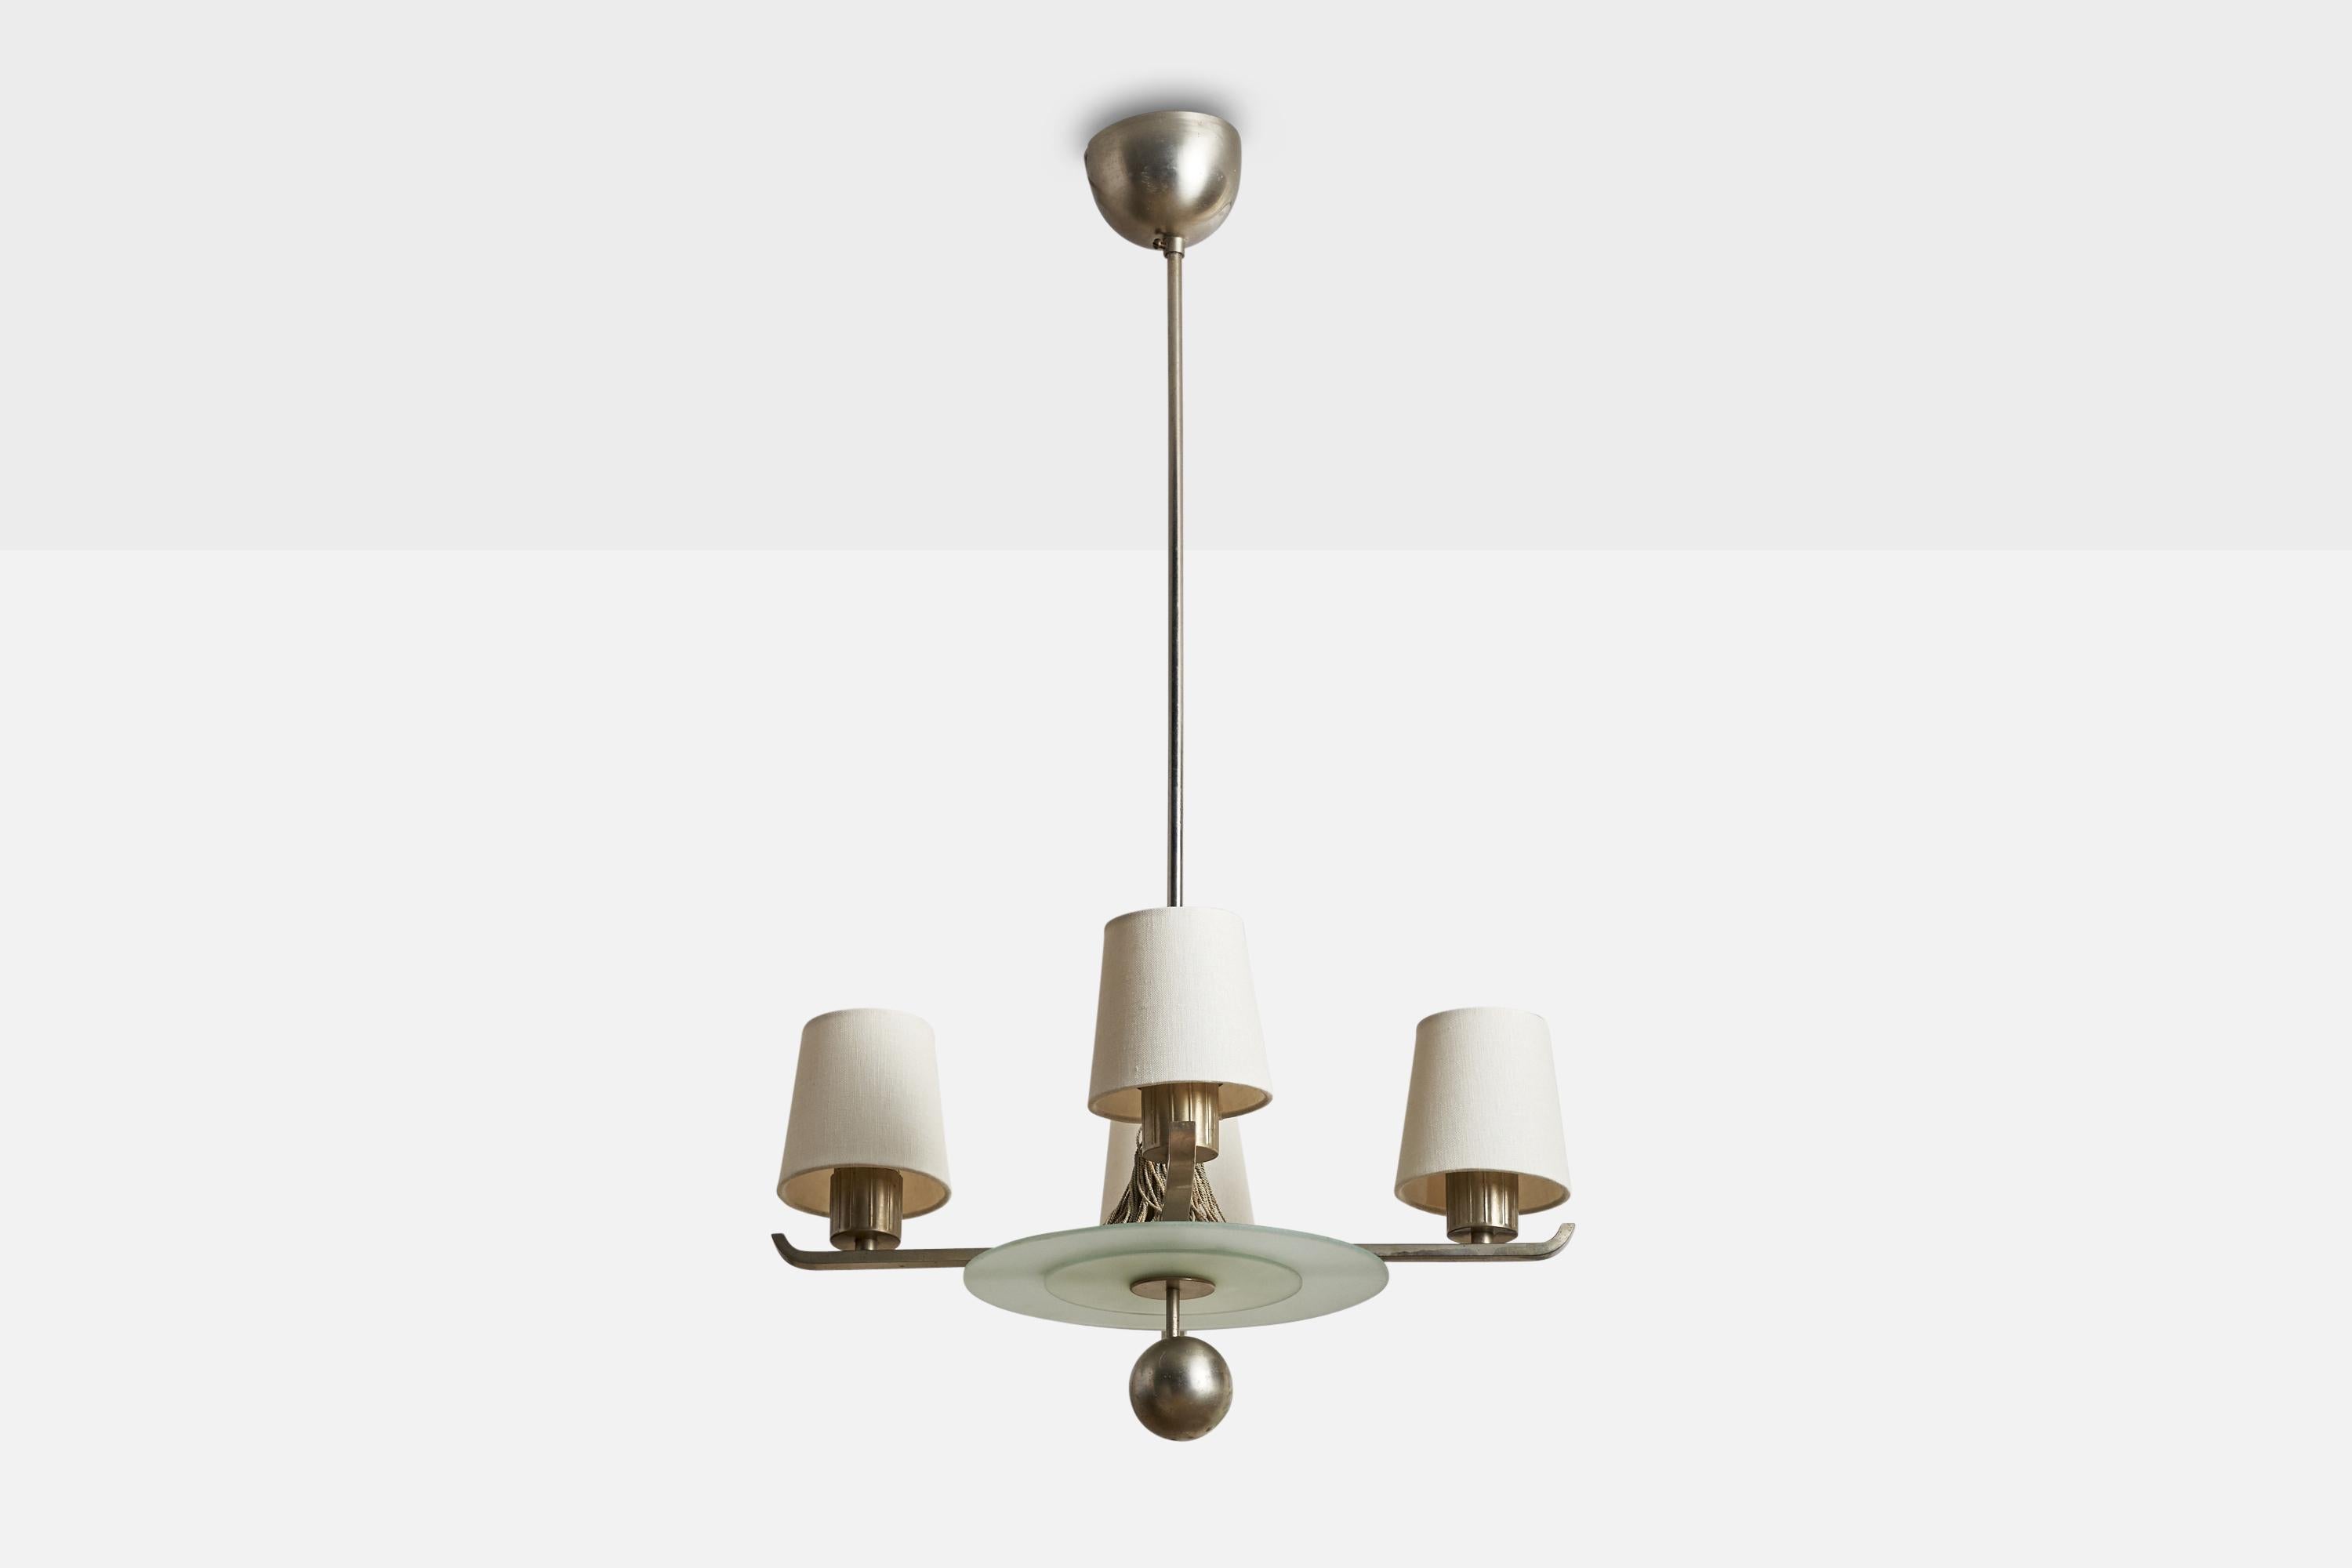 A metal, frosted glass, white fabric and grey fabric string chandelier designed and produced in Sweden, 1930s.

Dimensions of canopy (inches): 2.75” H x 3.5” Diameter
Socket takes standard E-26 bulbs. 4 sockets.There is no maximum wattage stated on